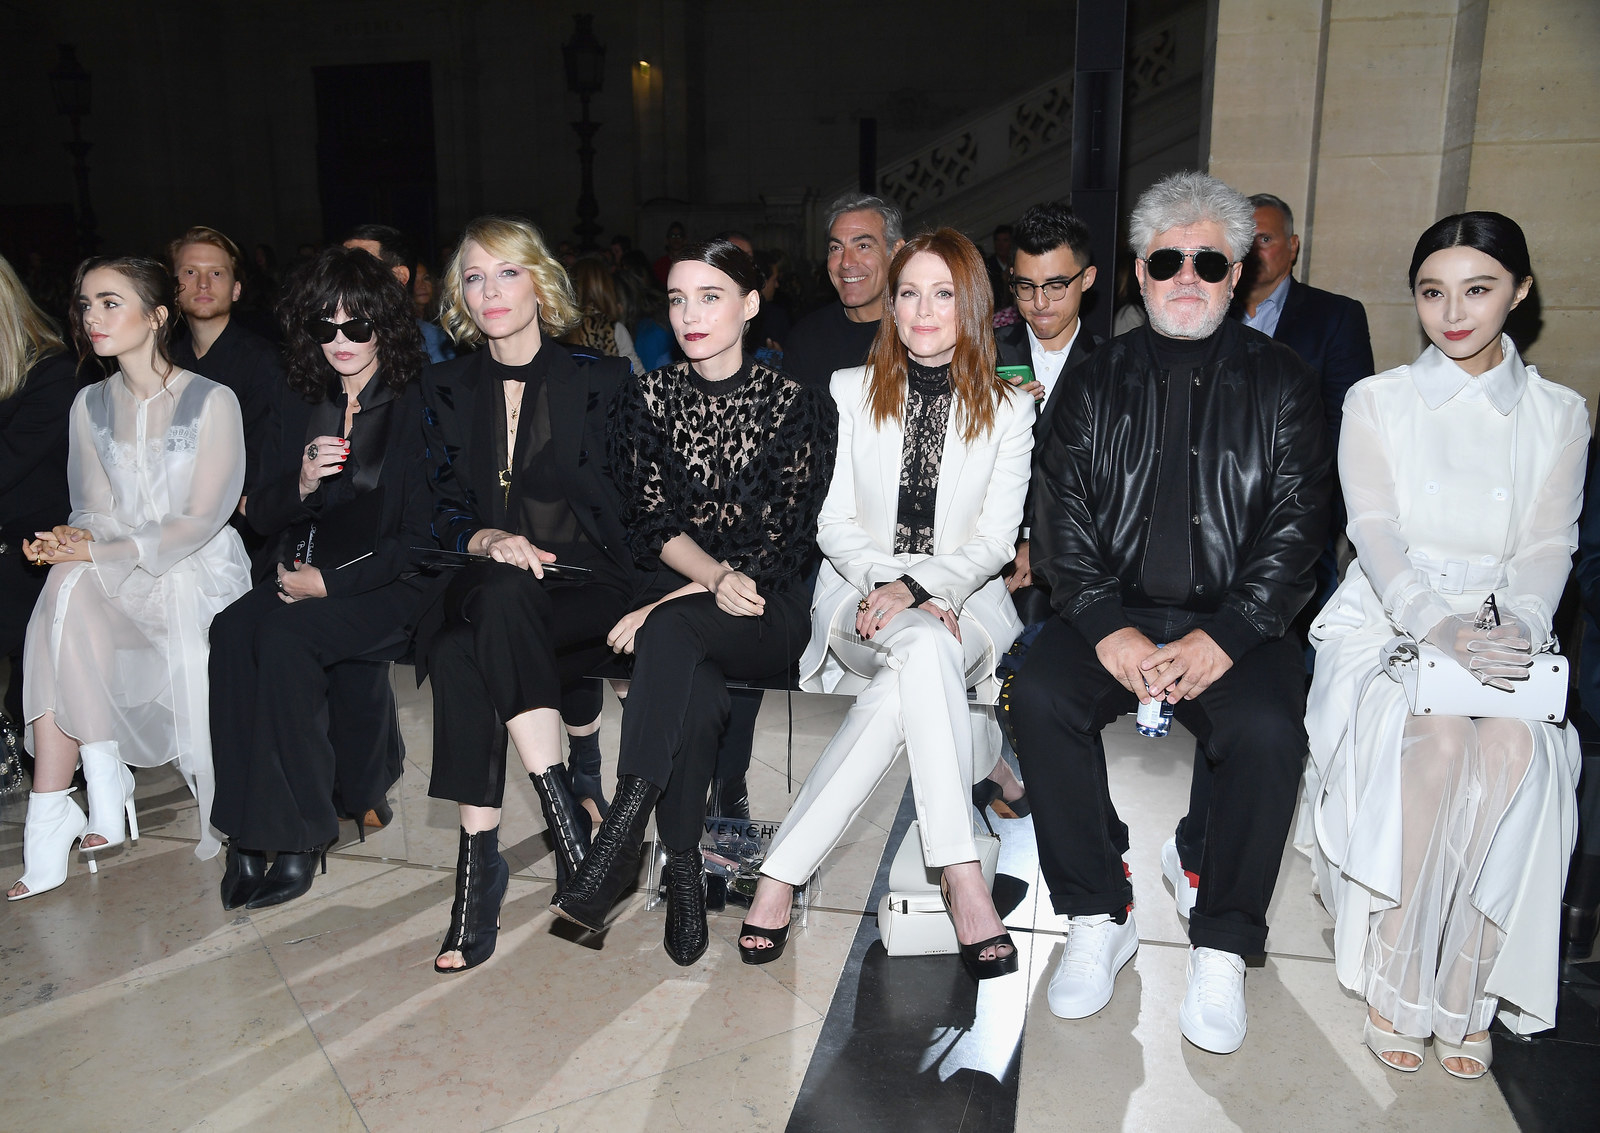 The Trifecta Of Lesbian Icons Sat Front Row At The Givenchy Show